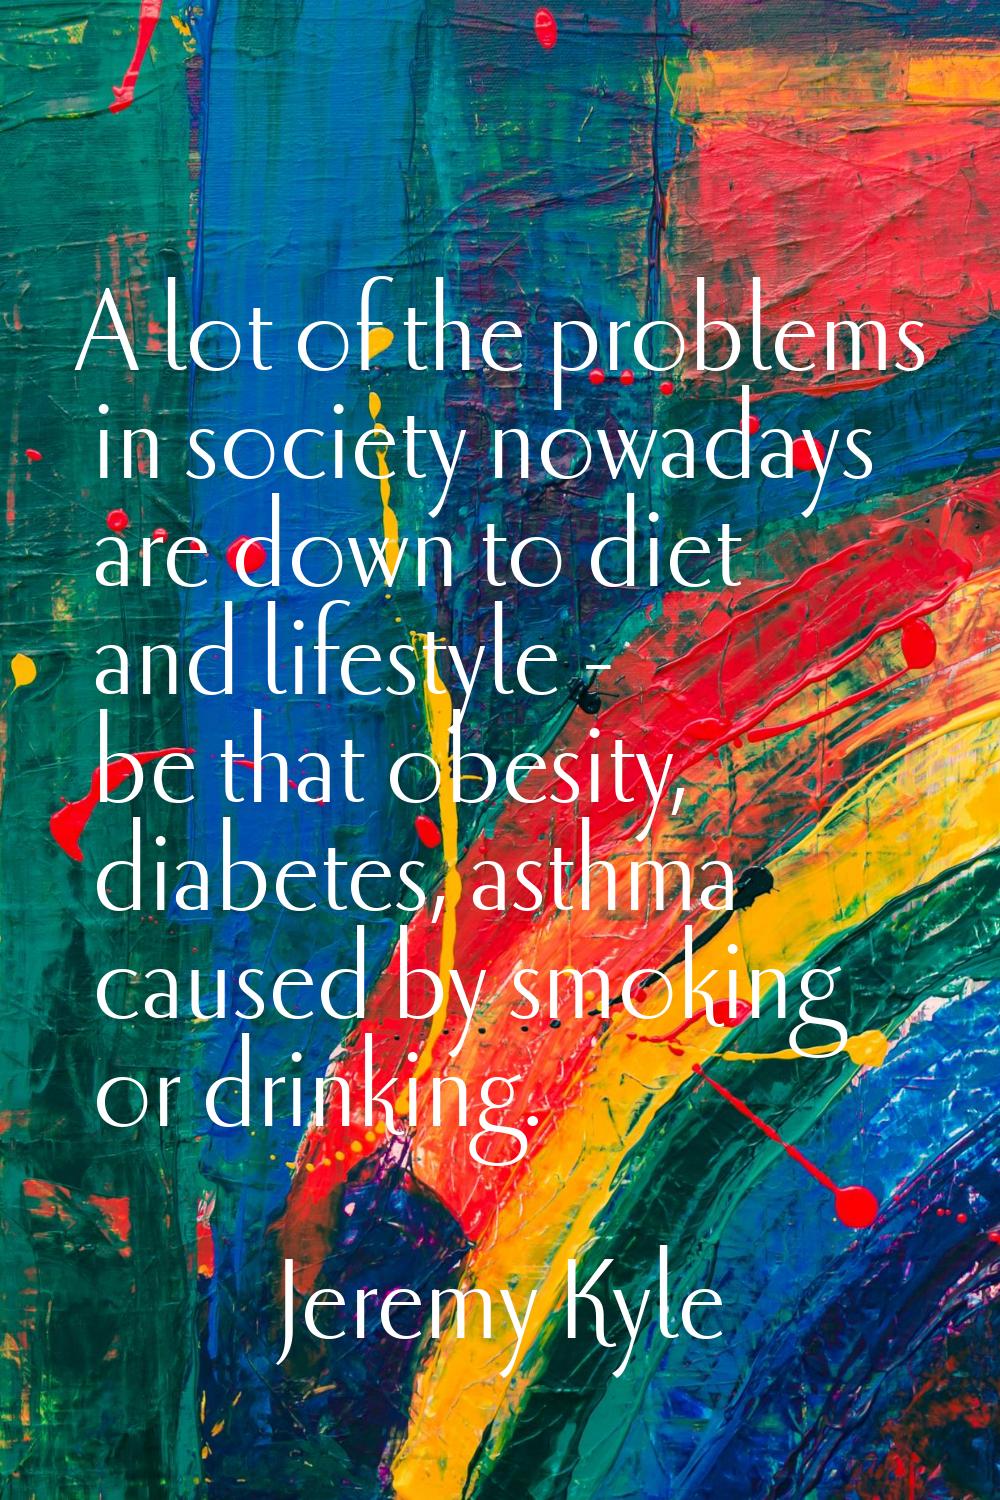 A lot of the problems in society nowadays are down to diet and lifestyle - be that obesity, diabete